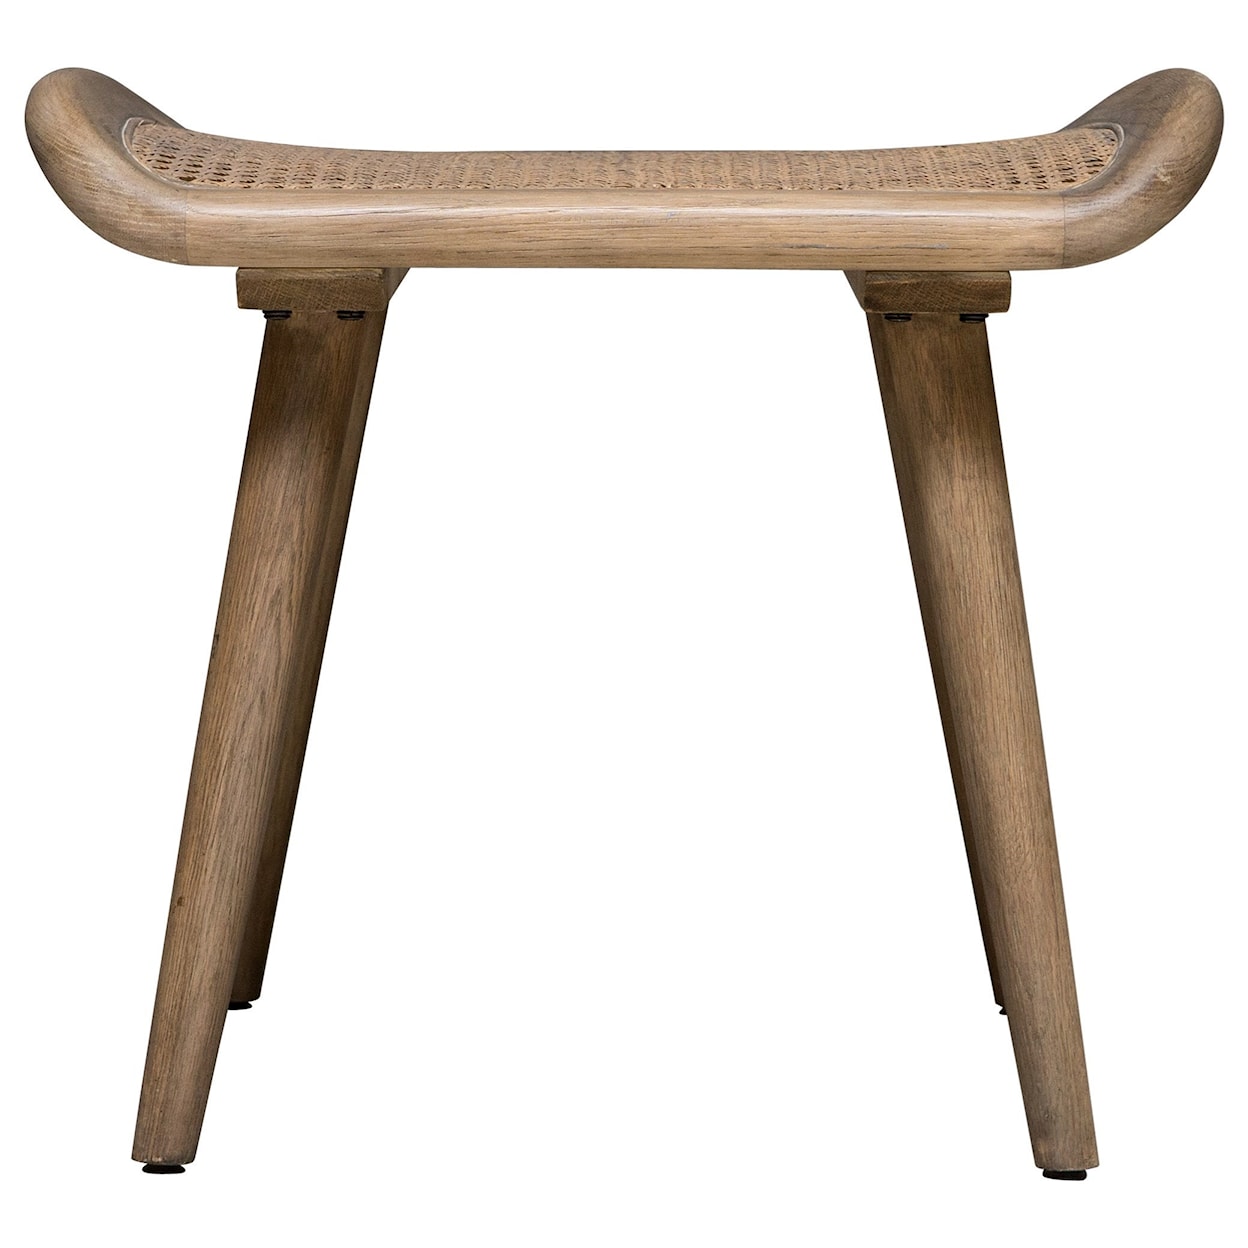 Uttermost Accent Furniture - Benches Arne Scandinavian Small Bench